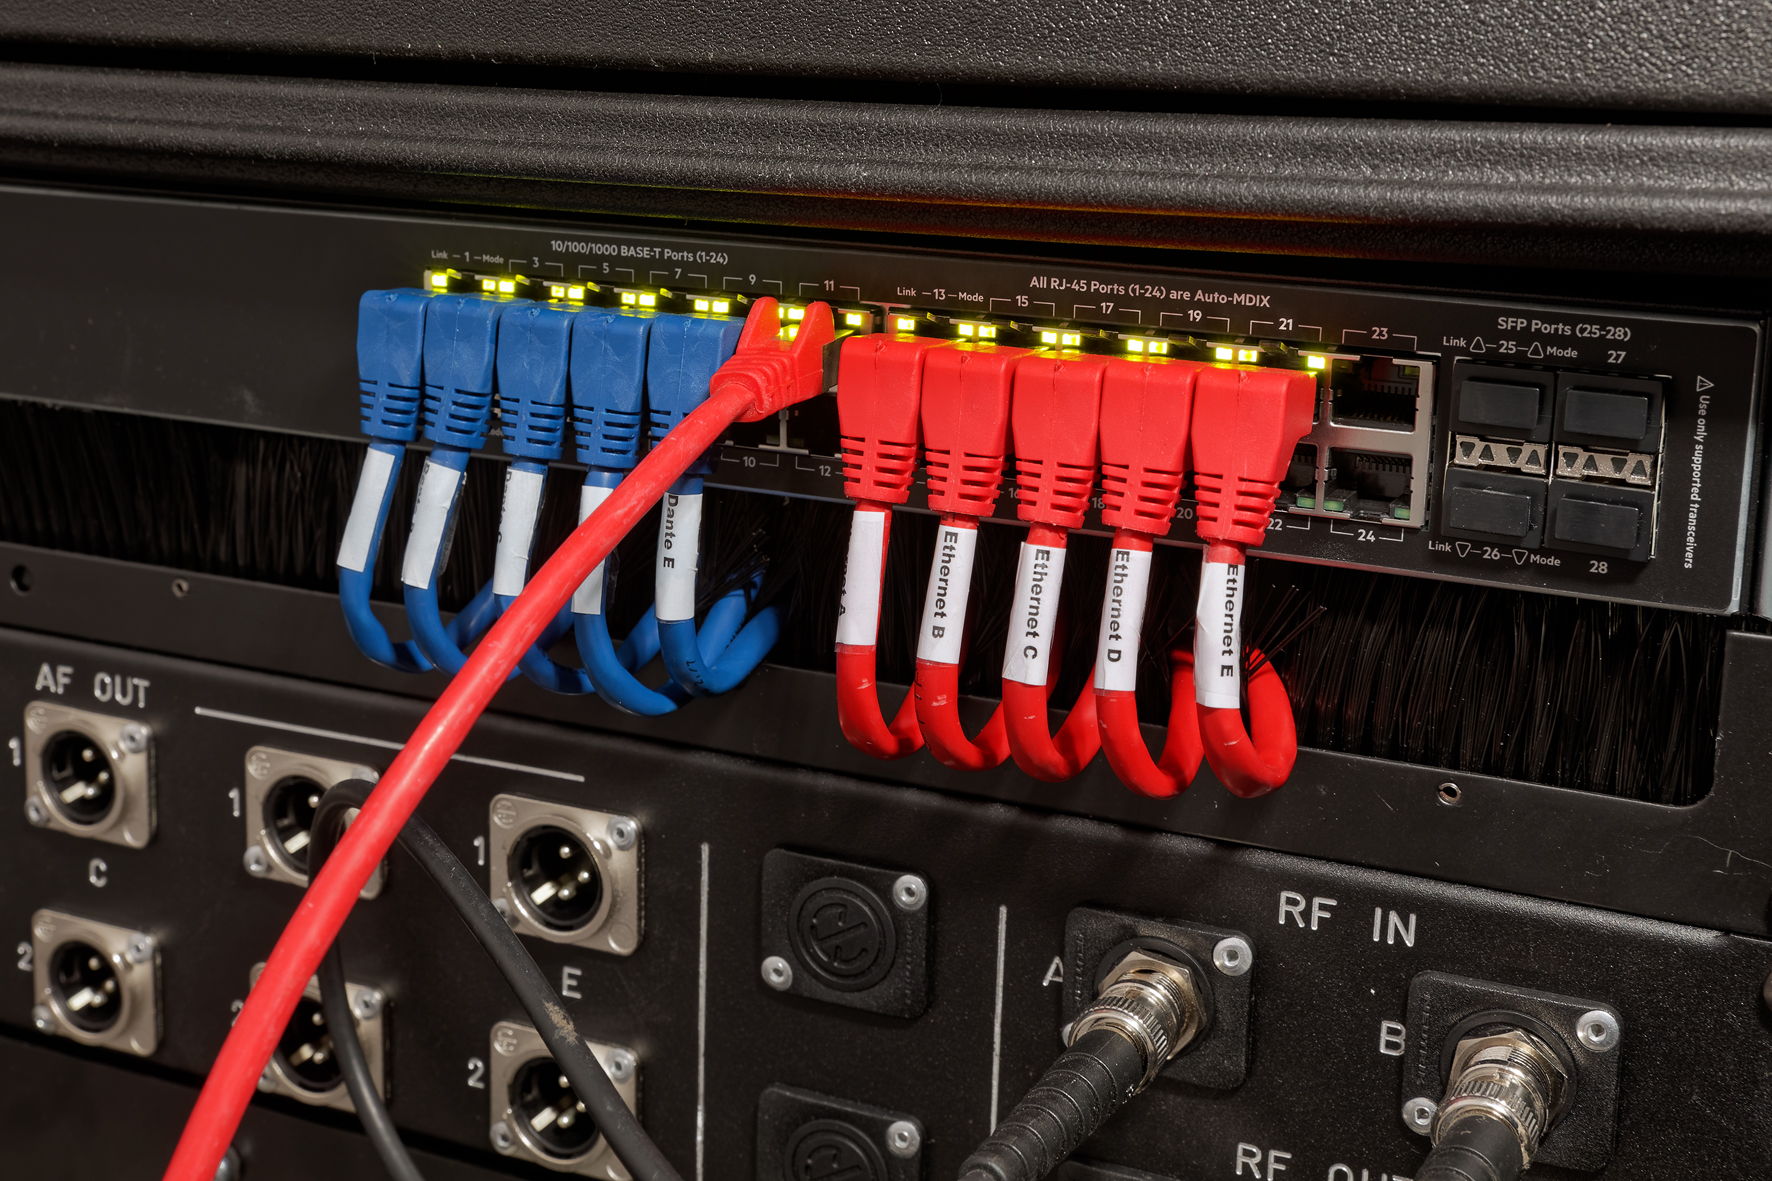 A further equipment feature of the transport case is an Aruba network switch that carries the Dante signals from the receiver and which can itself make a corresponding signal available to an RJ45 output for connection to the network